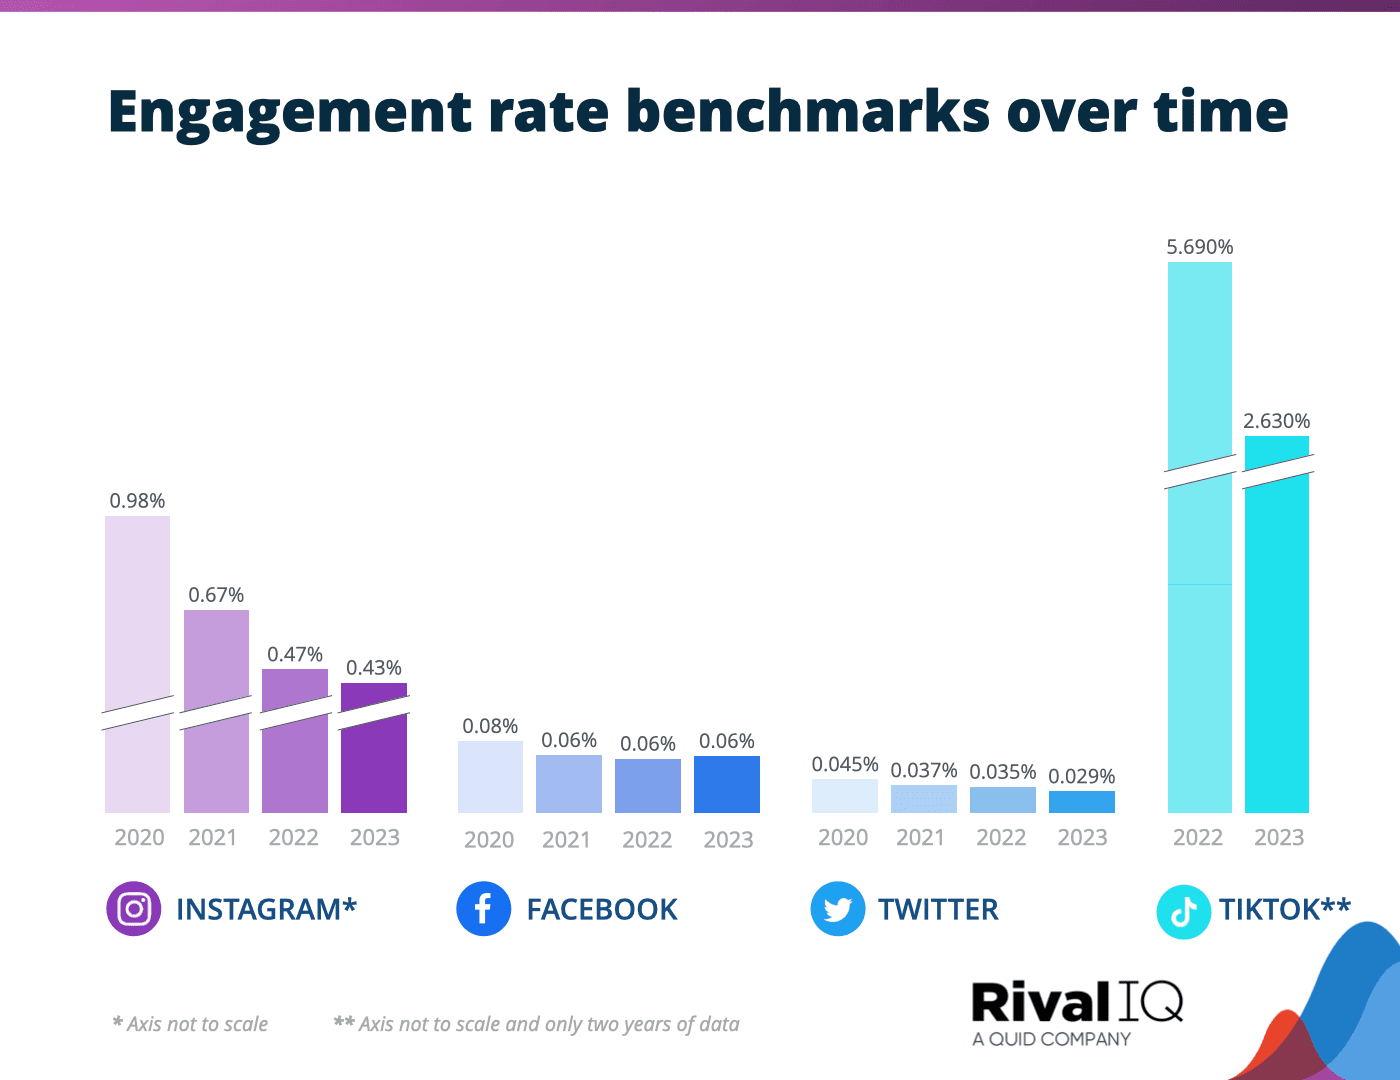 Rival IQ's report examines brand performance across major social platforms, revealing low engagement rates across industries.